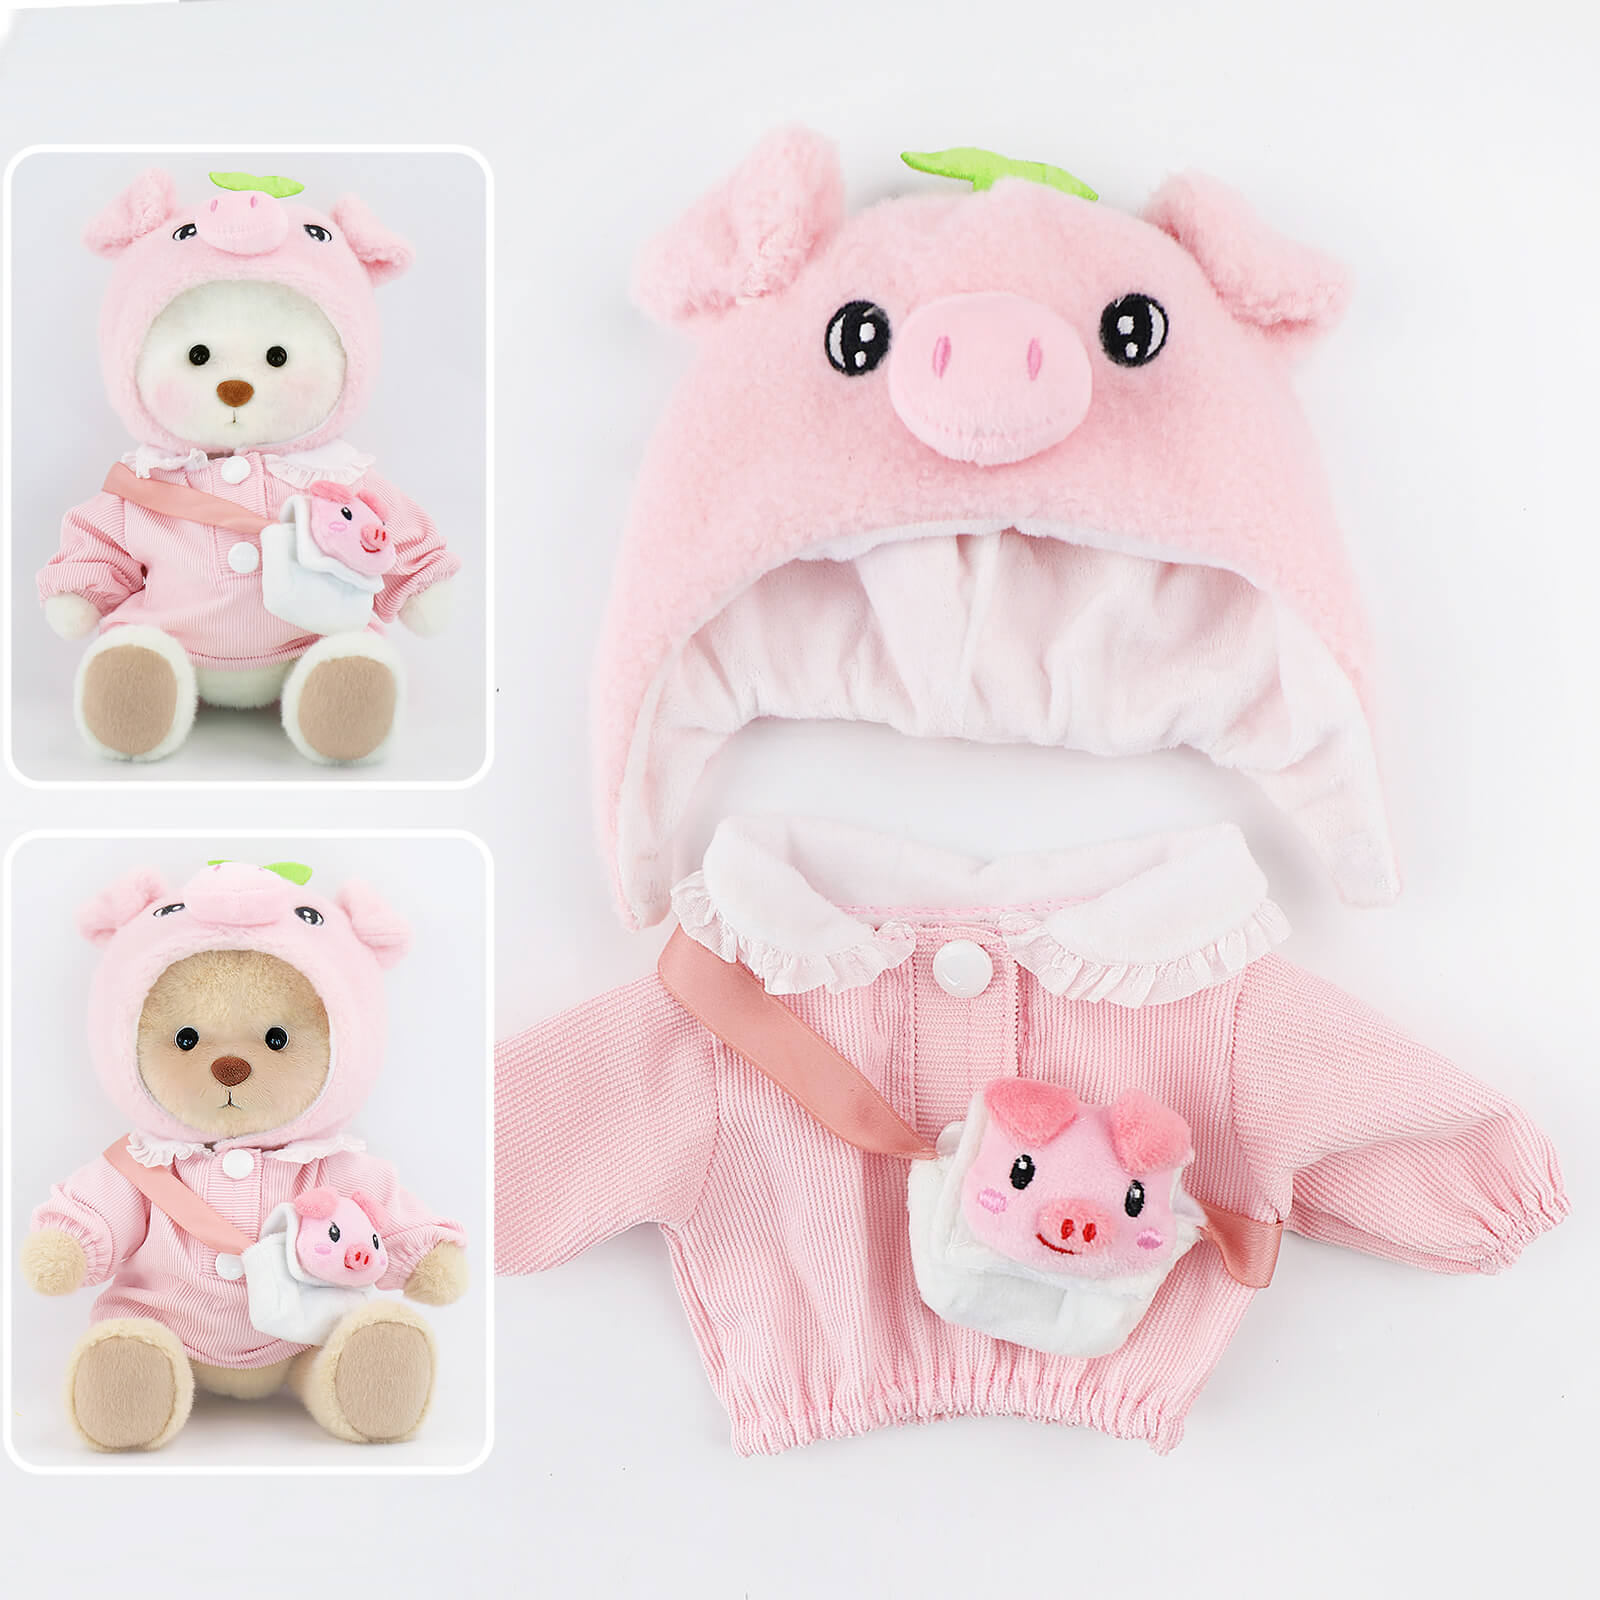 Beddingset.vip-Bedding Bear Outfits-Pink Piggy Set of Three(Outfit Only) | Teddy Bear Clothes-Pink